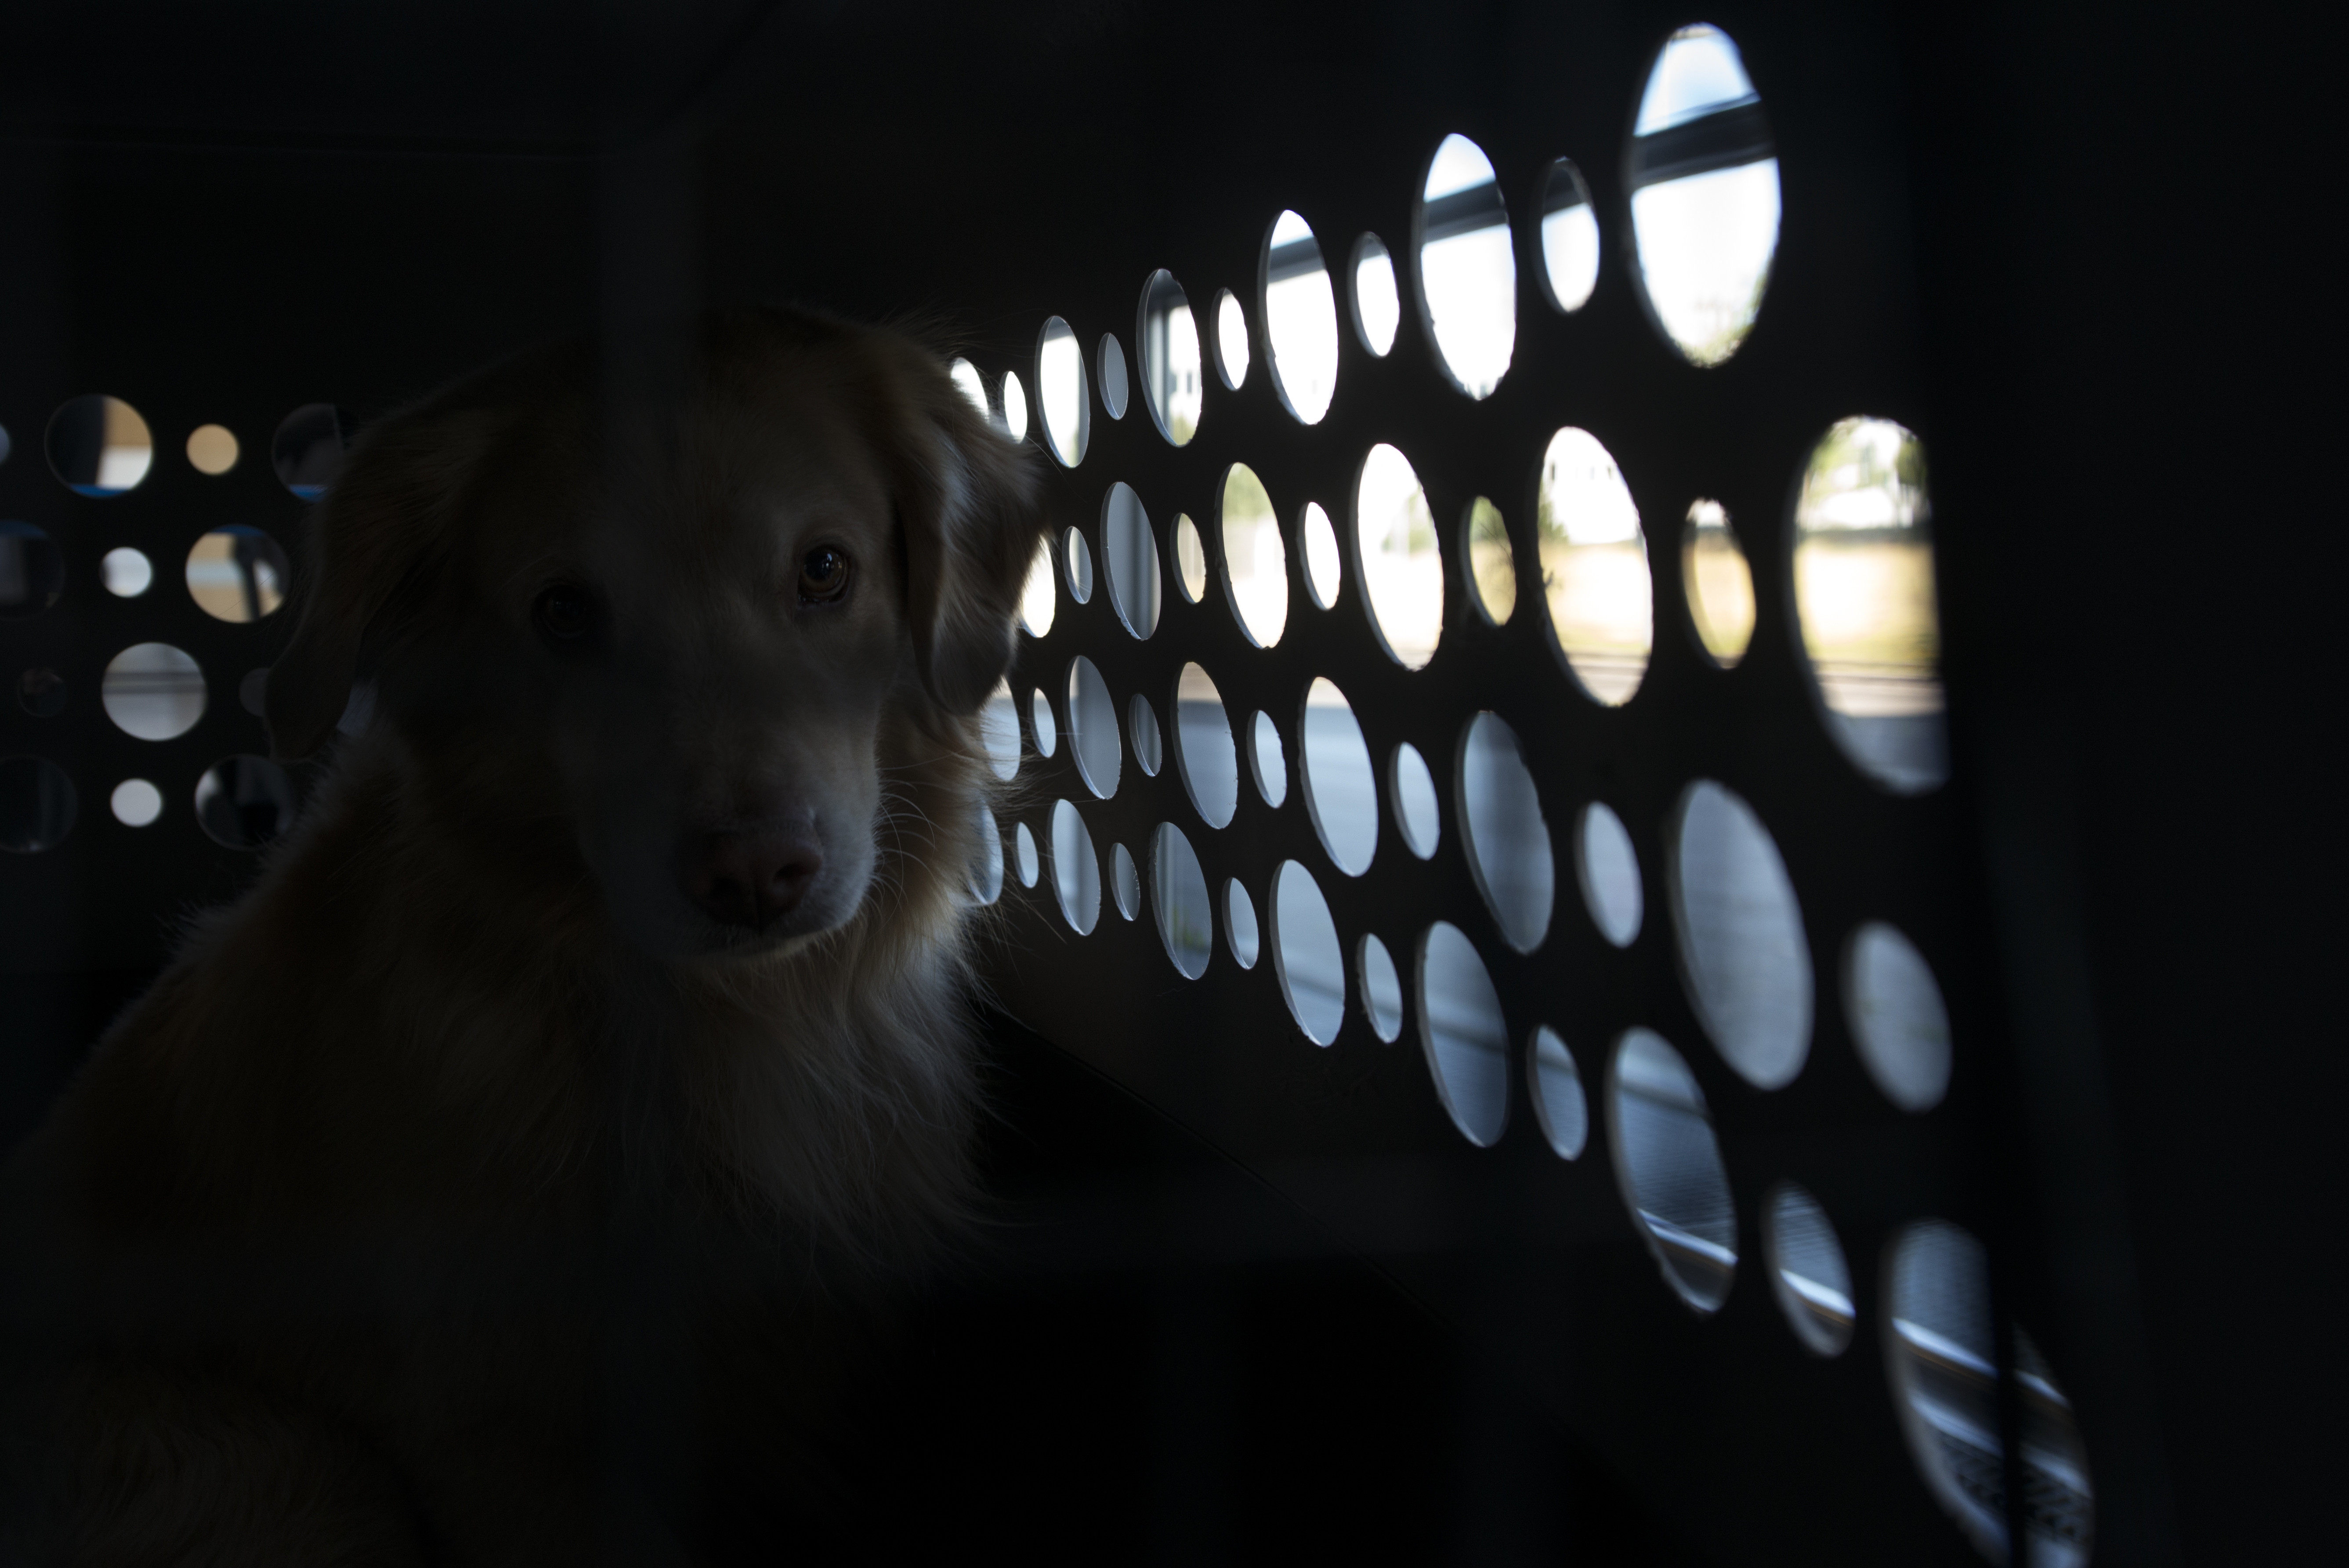 Otis waits to check-in at the Ramstein Passenger Terminal, Ramstein Air Base, Germany, May 29, 2020. Pets must remain in their kennels while in the terminal or public areas. (U.S. Air Force photo by Airman 1st Class Taylor D. Slater)